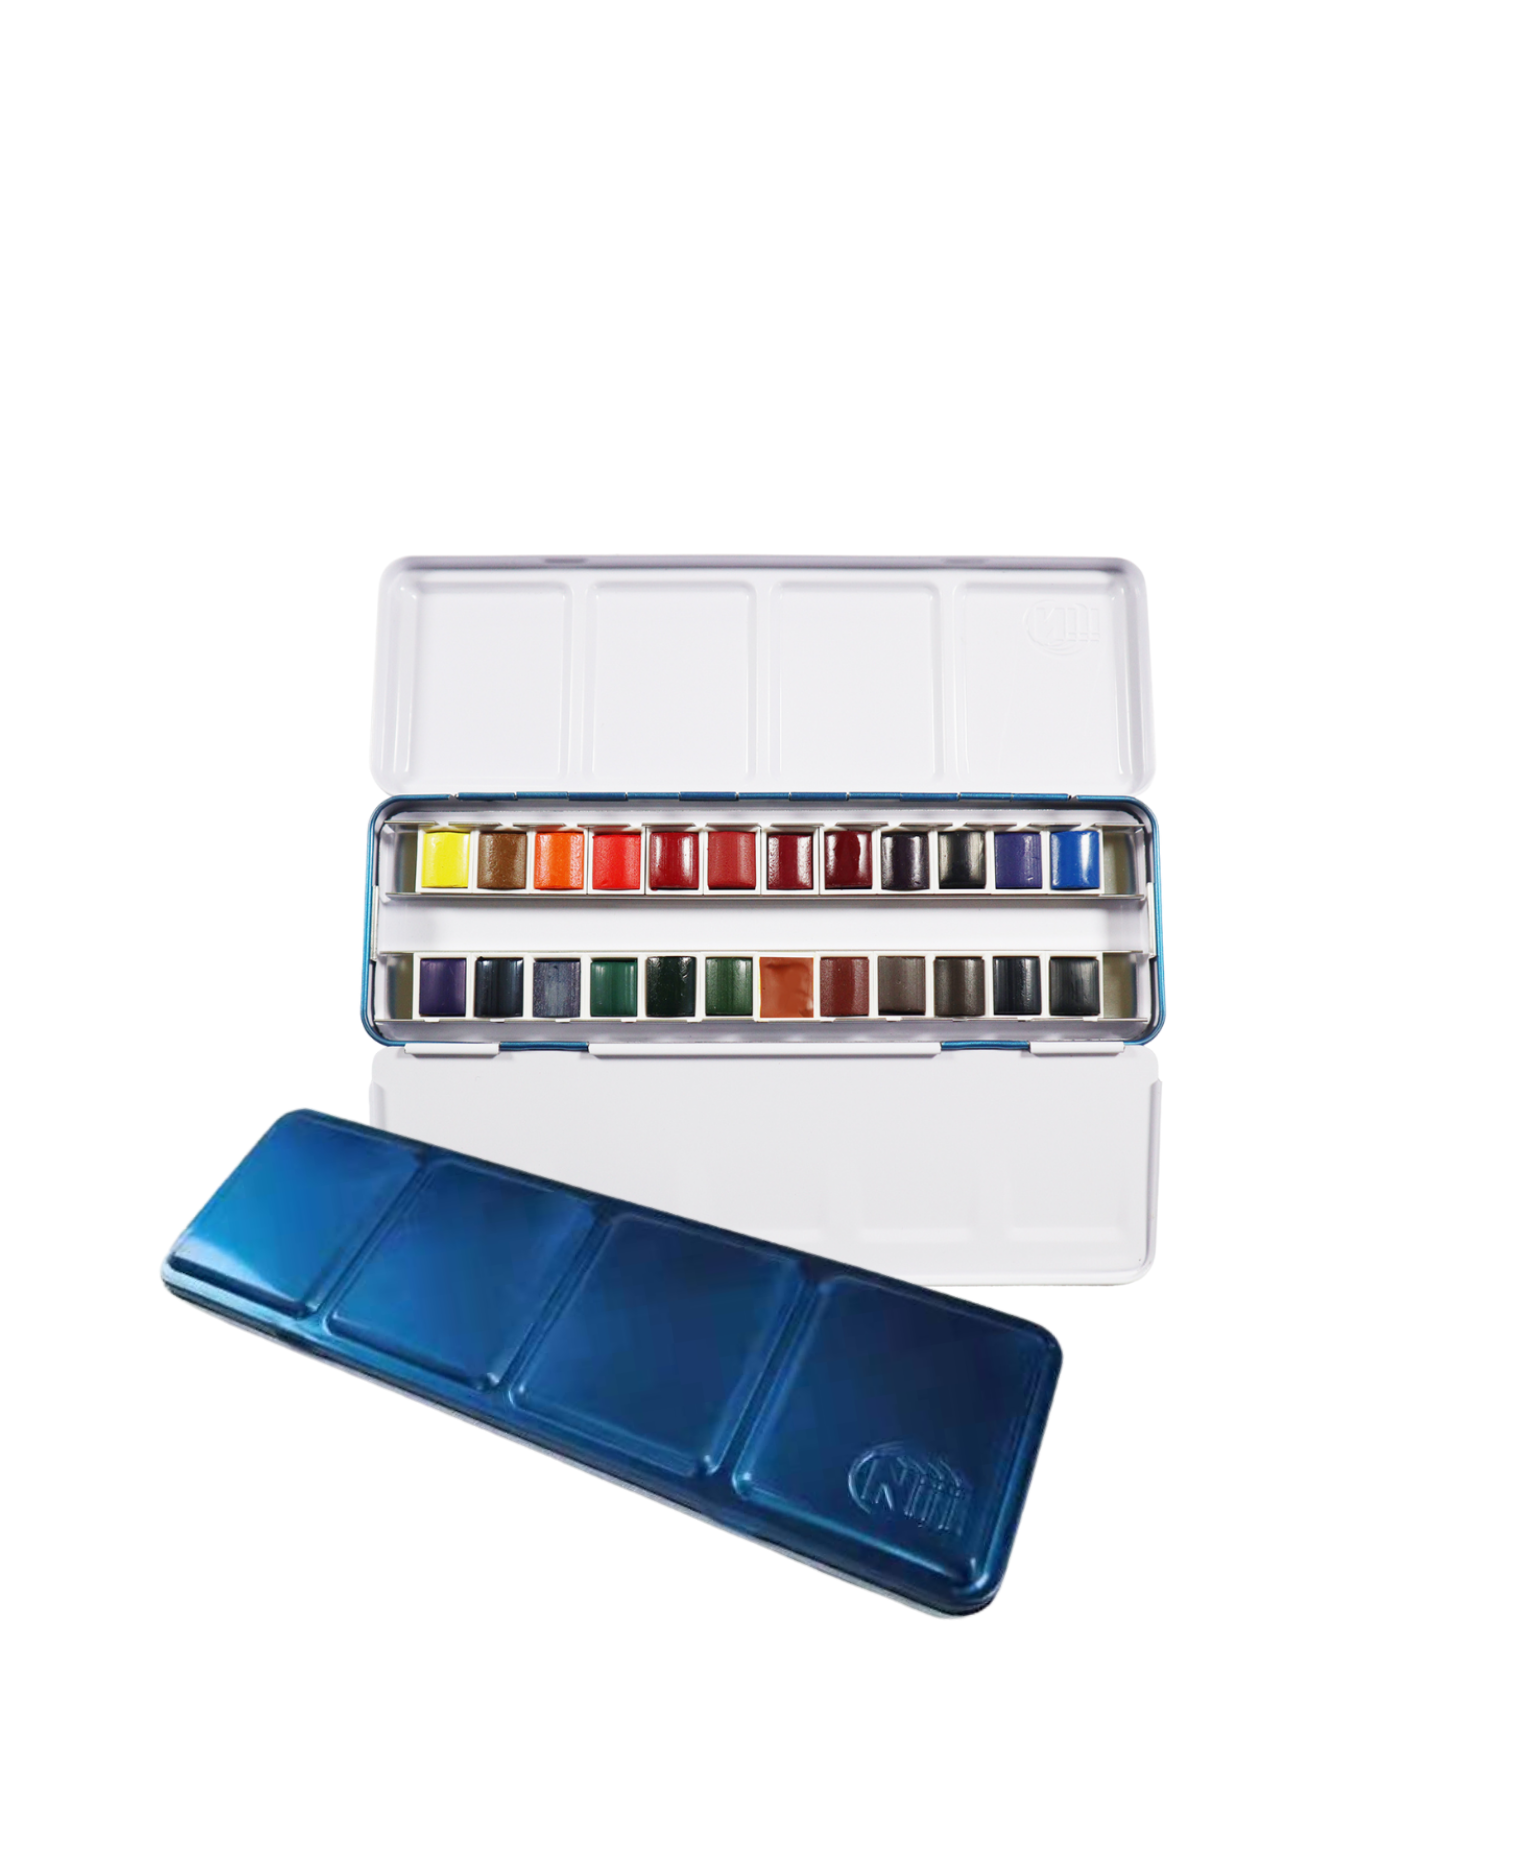 Yasutomo Pearlescent Watercolor Paint Set - Multi-Color, 16 pk - Smith's  Food and Drug